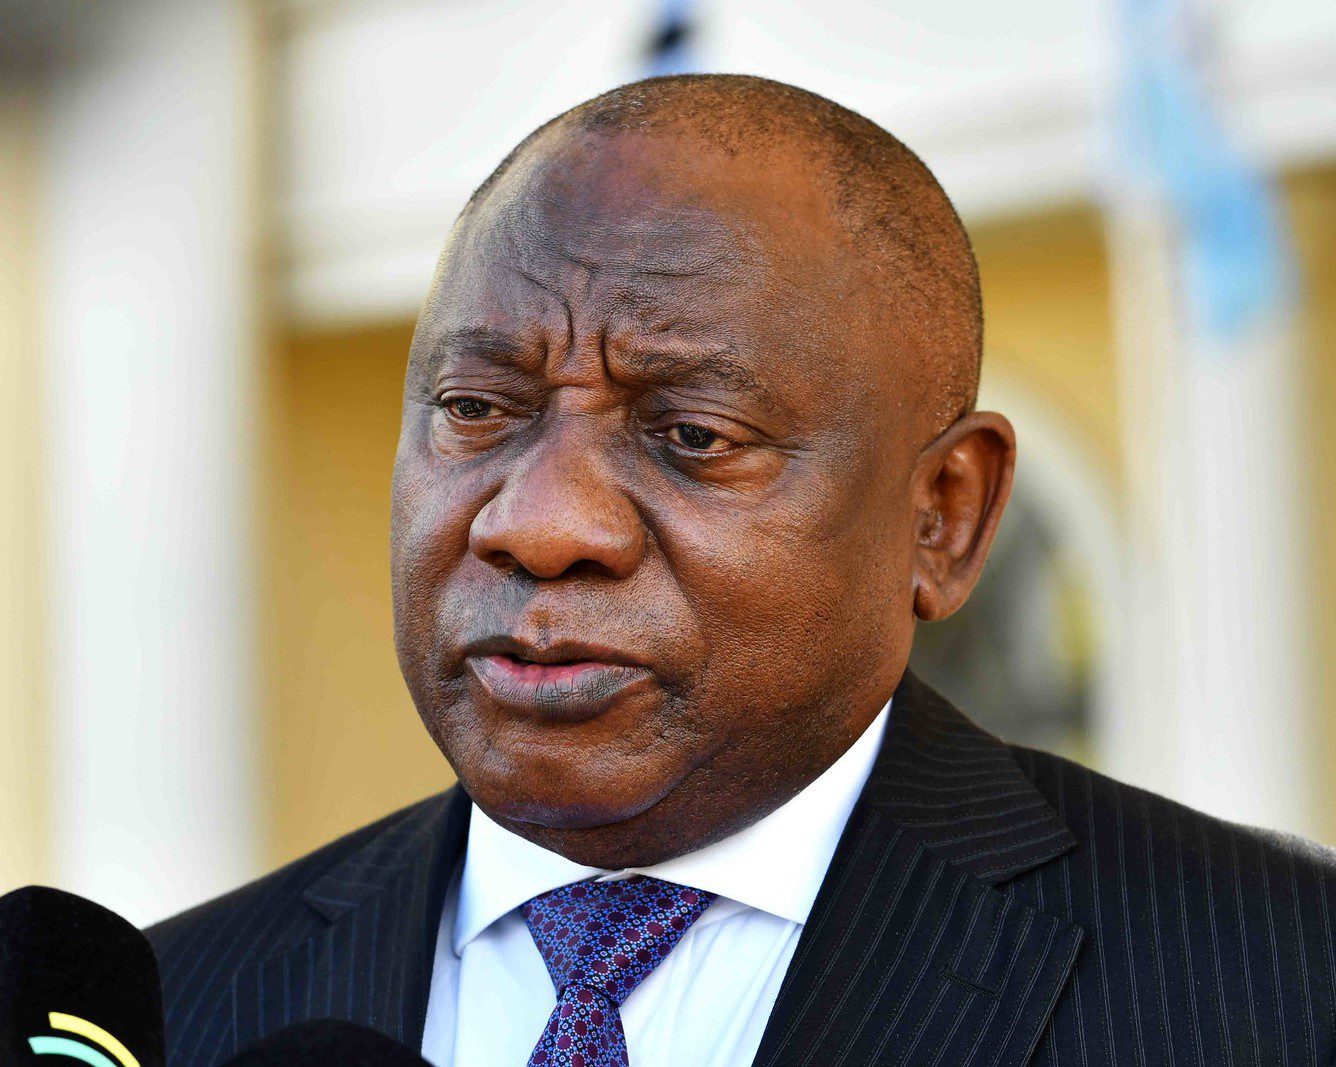 ramaphosa-heads-opposition-to-da-court-action-on-cadre-deployment